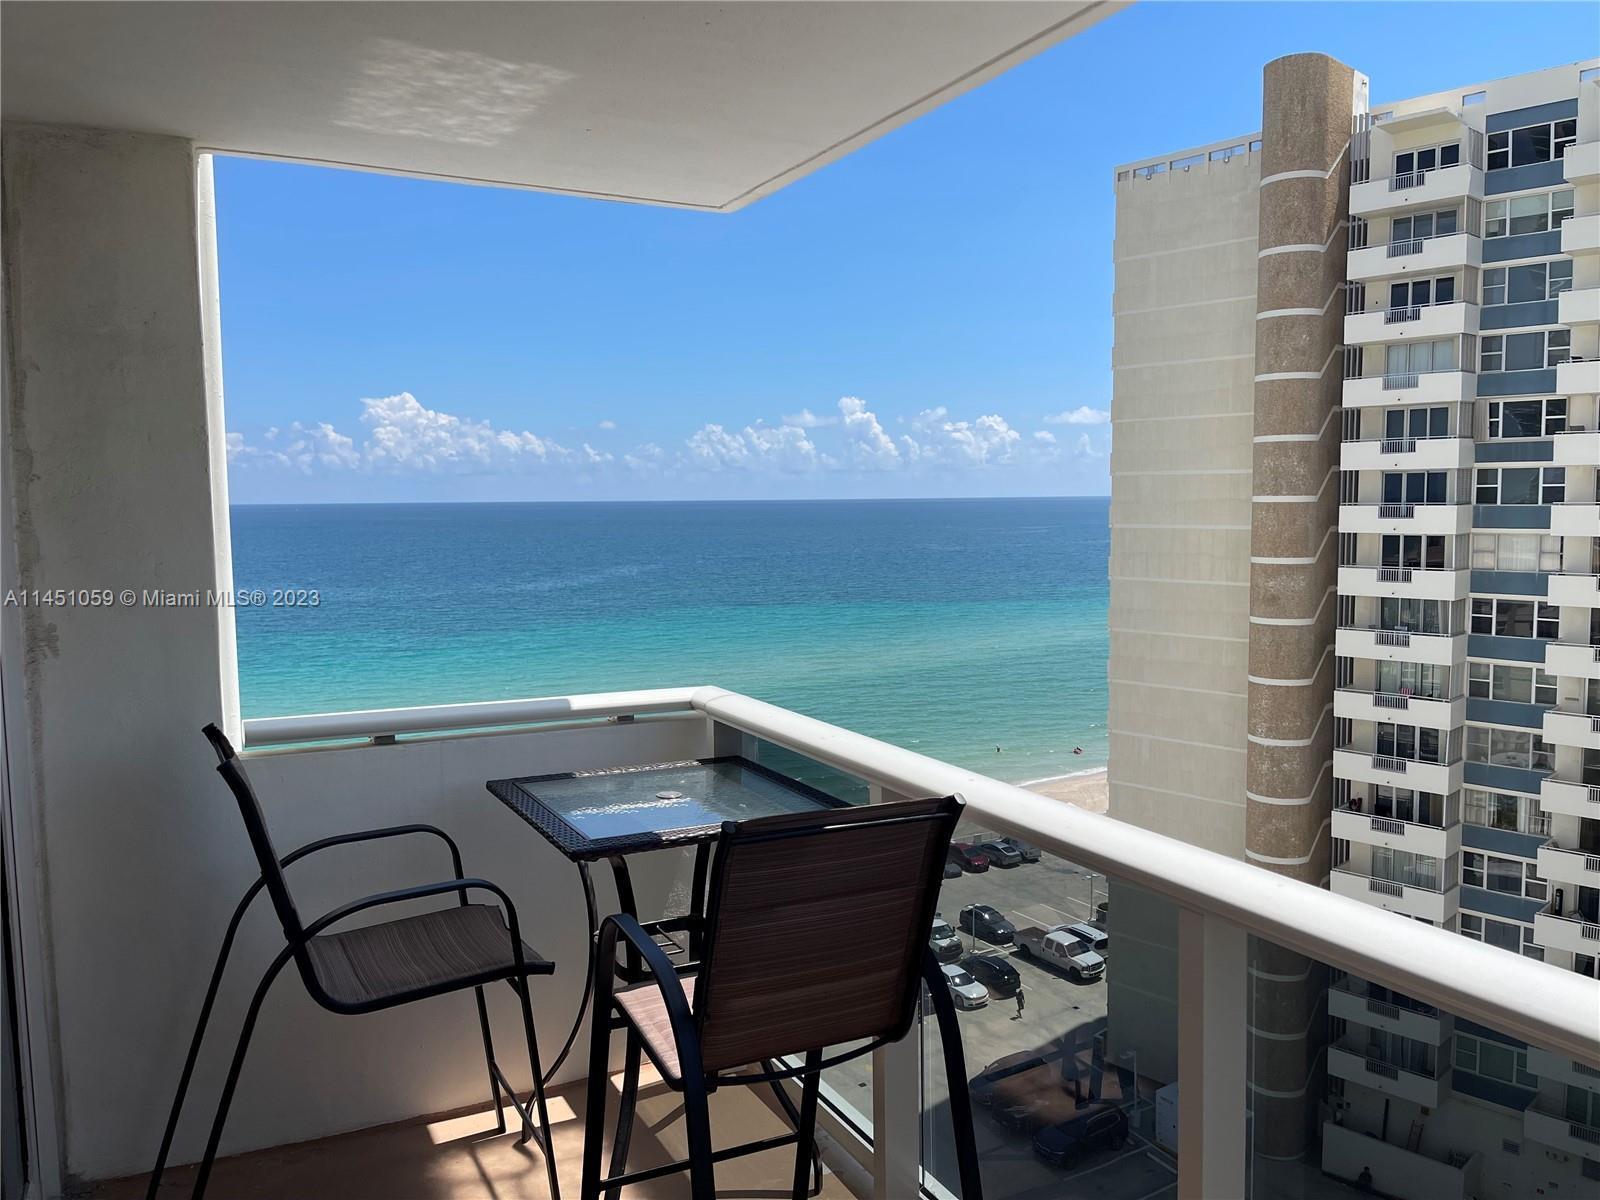 Enjoy a luxurious oceanfront lifestyle from this well maintained fully furnished condo in Hallandale